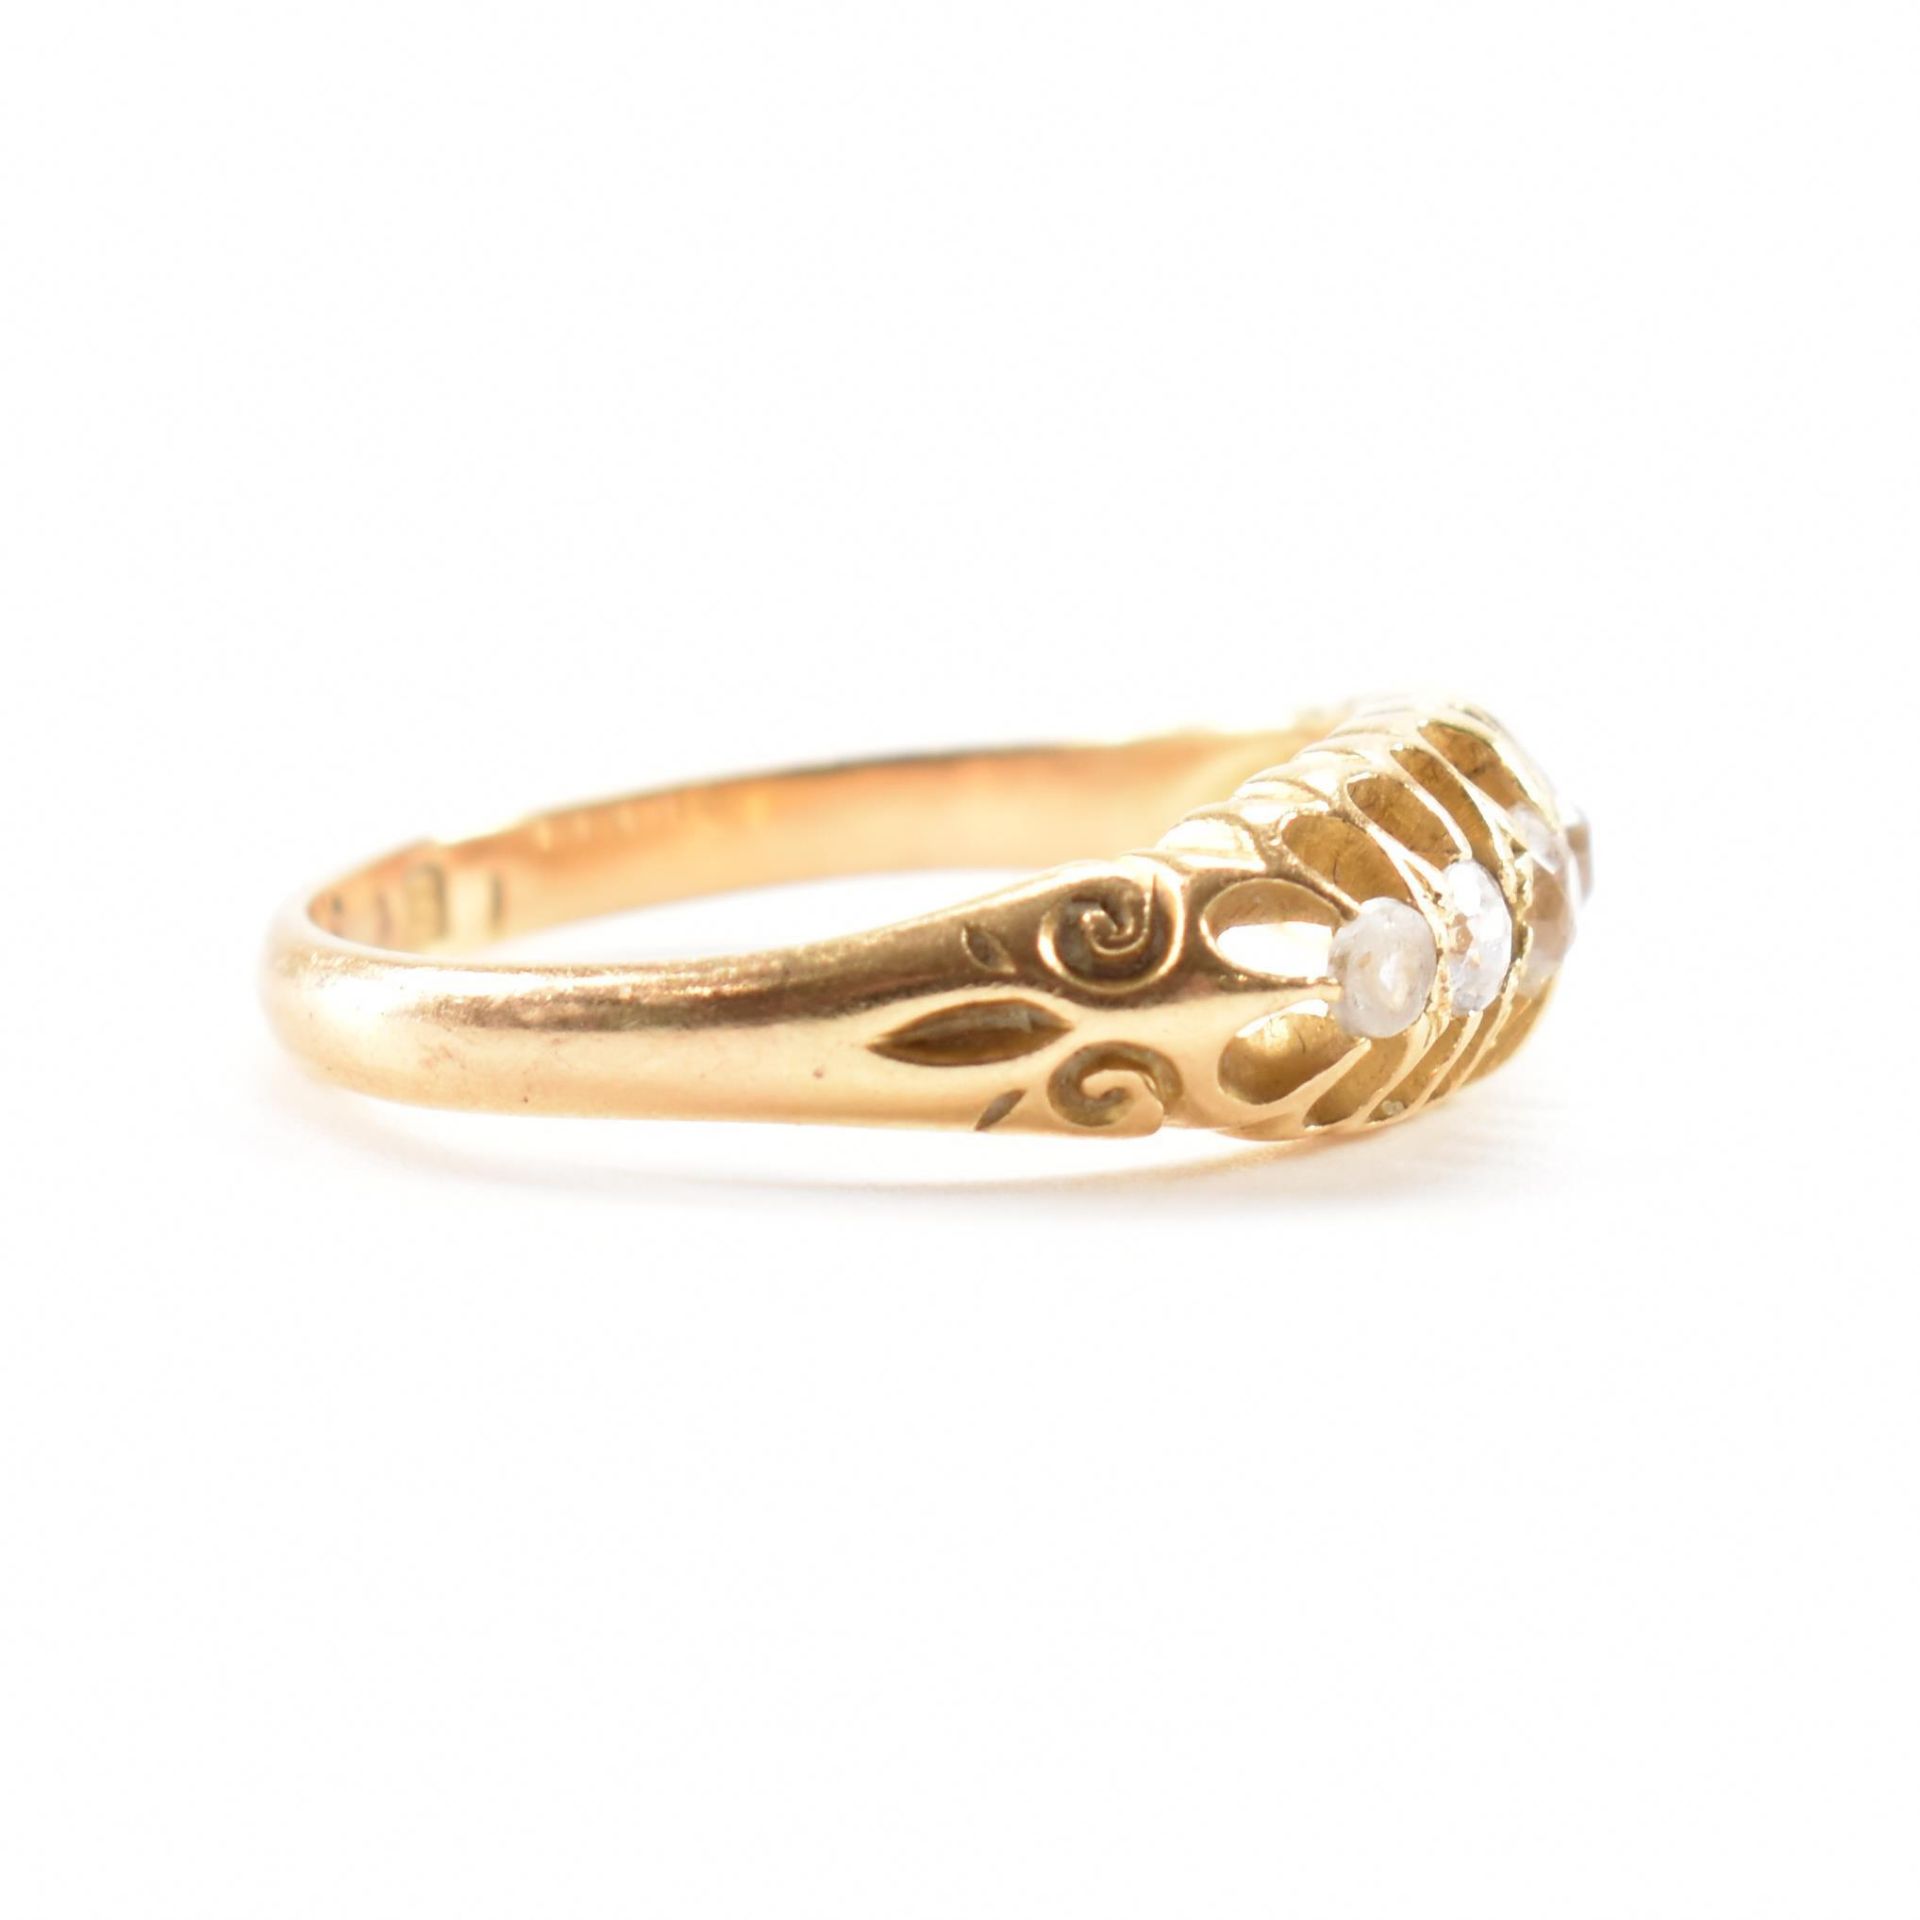 HALLMARKED 18CT GOLD FIVE STONE RING - Image 5 of 9